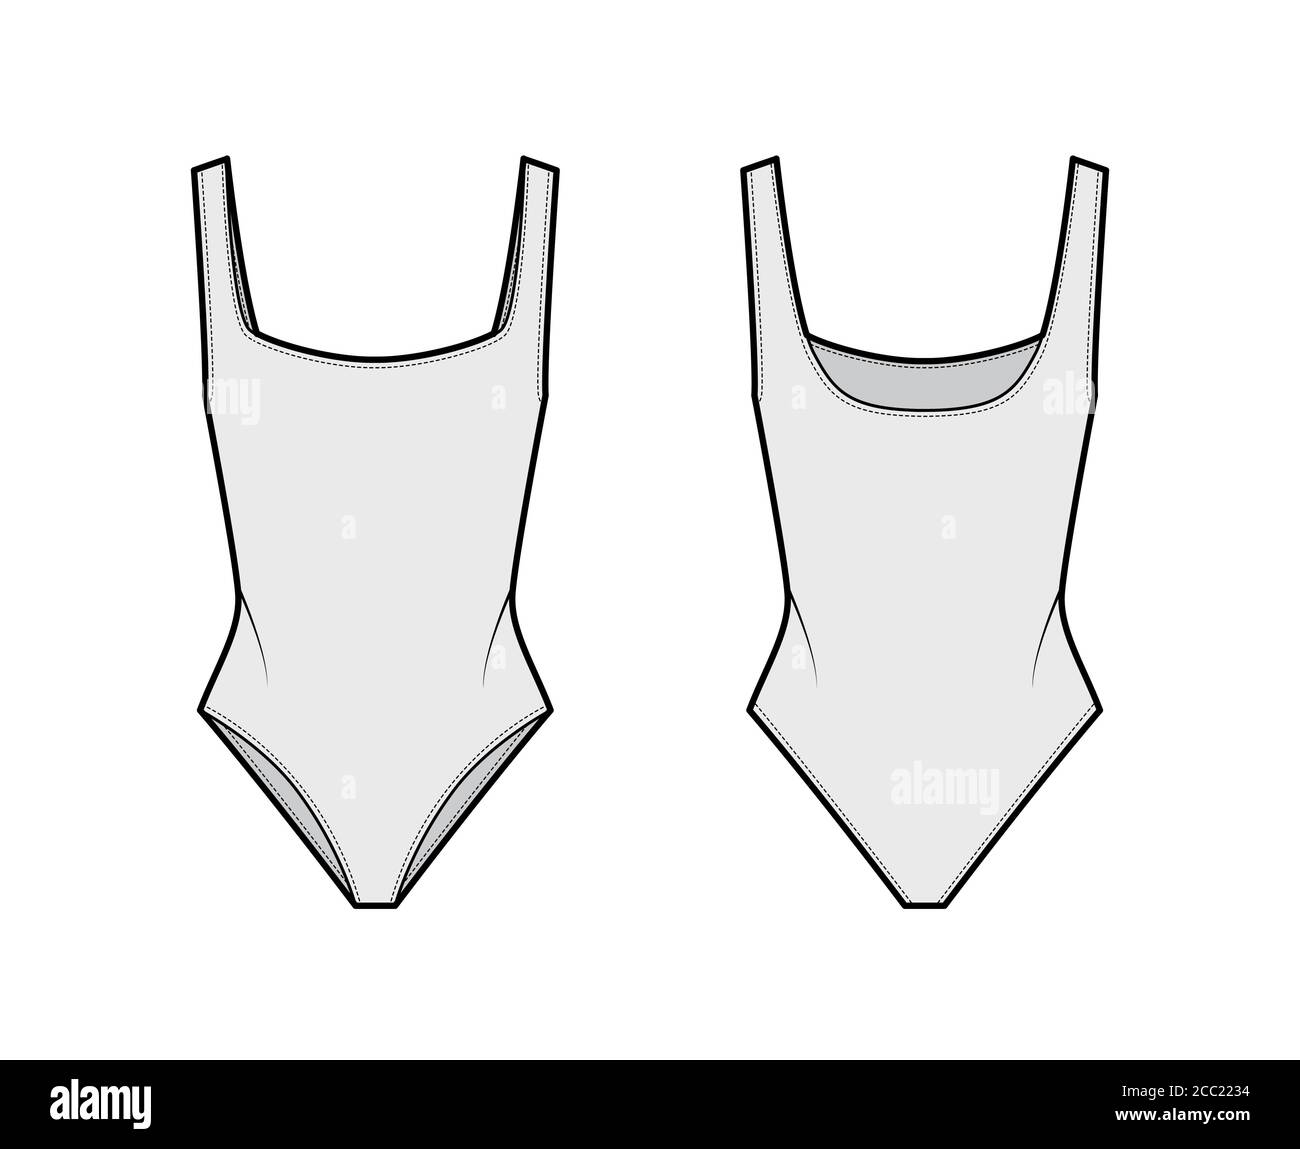 Stretch-jersey bodysuit technical fashion illustration with open back ...